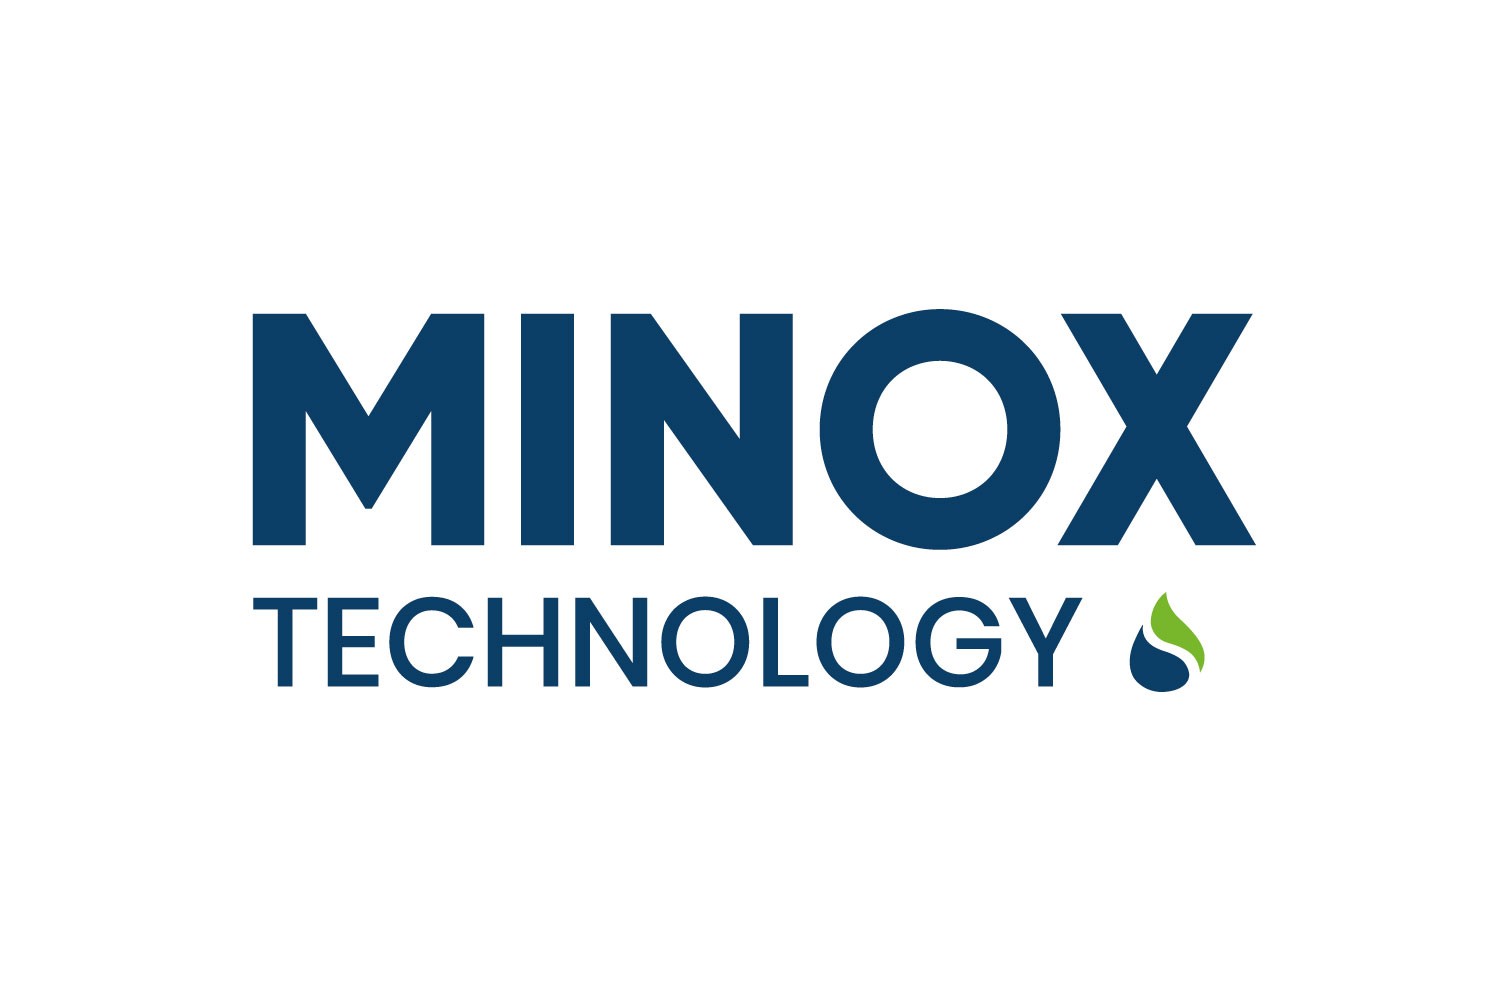 New web pages and logo - Minox Technology